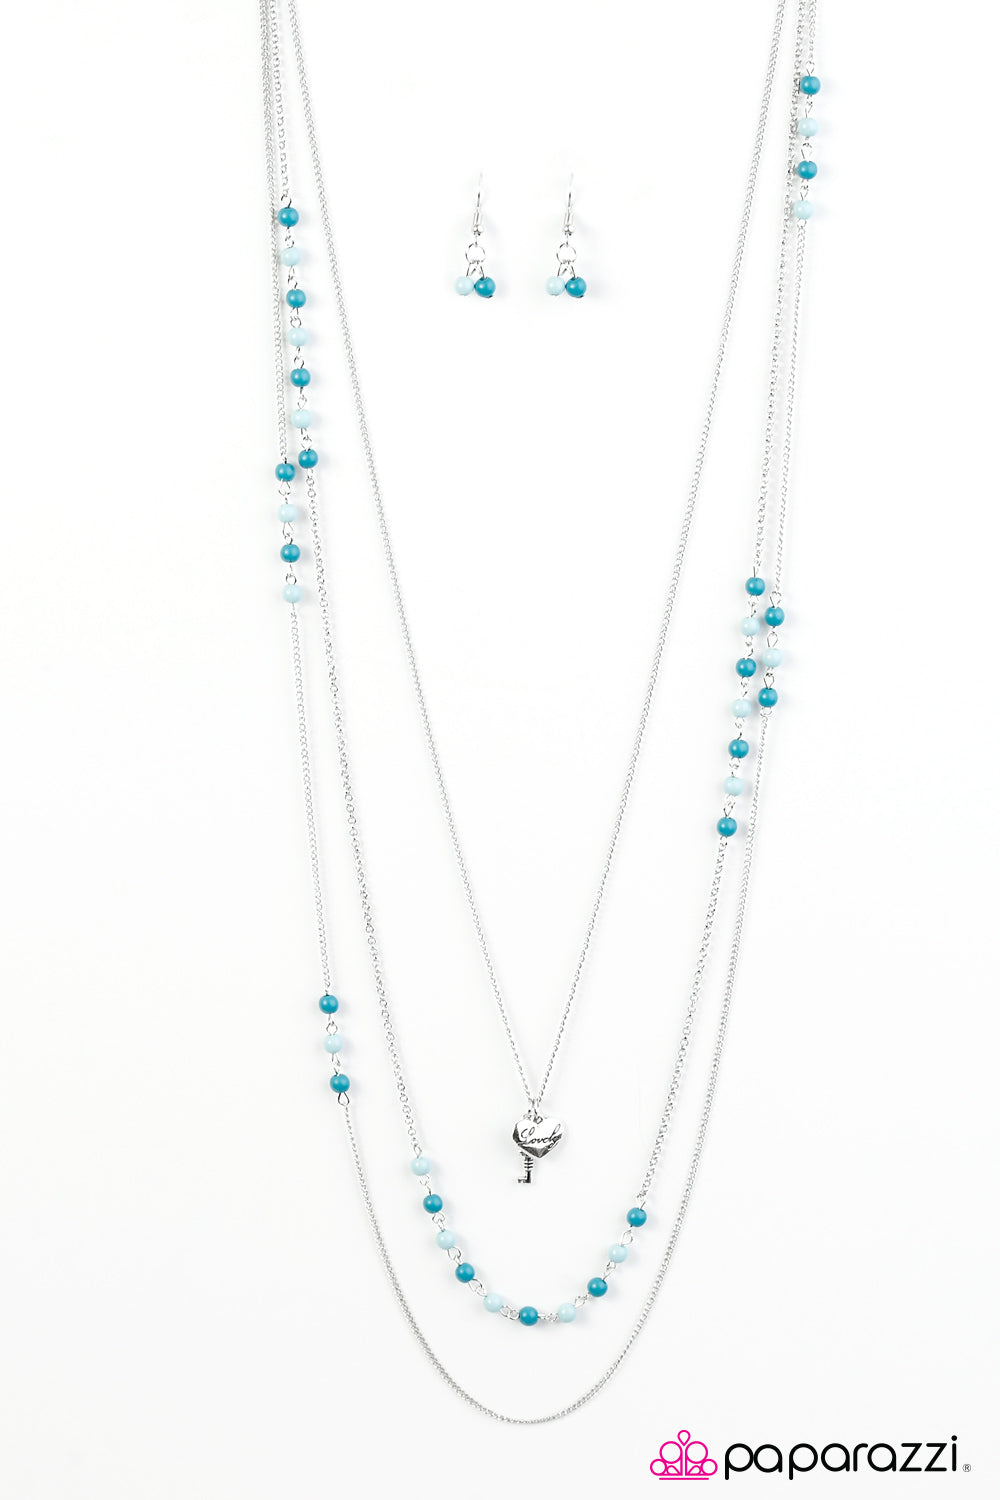 Paparazzi ♥ A Lovely Time - Blue ♥  Necklace